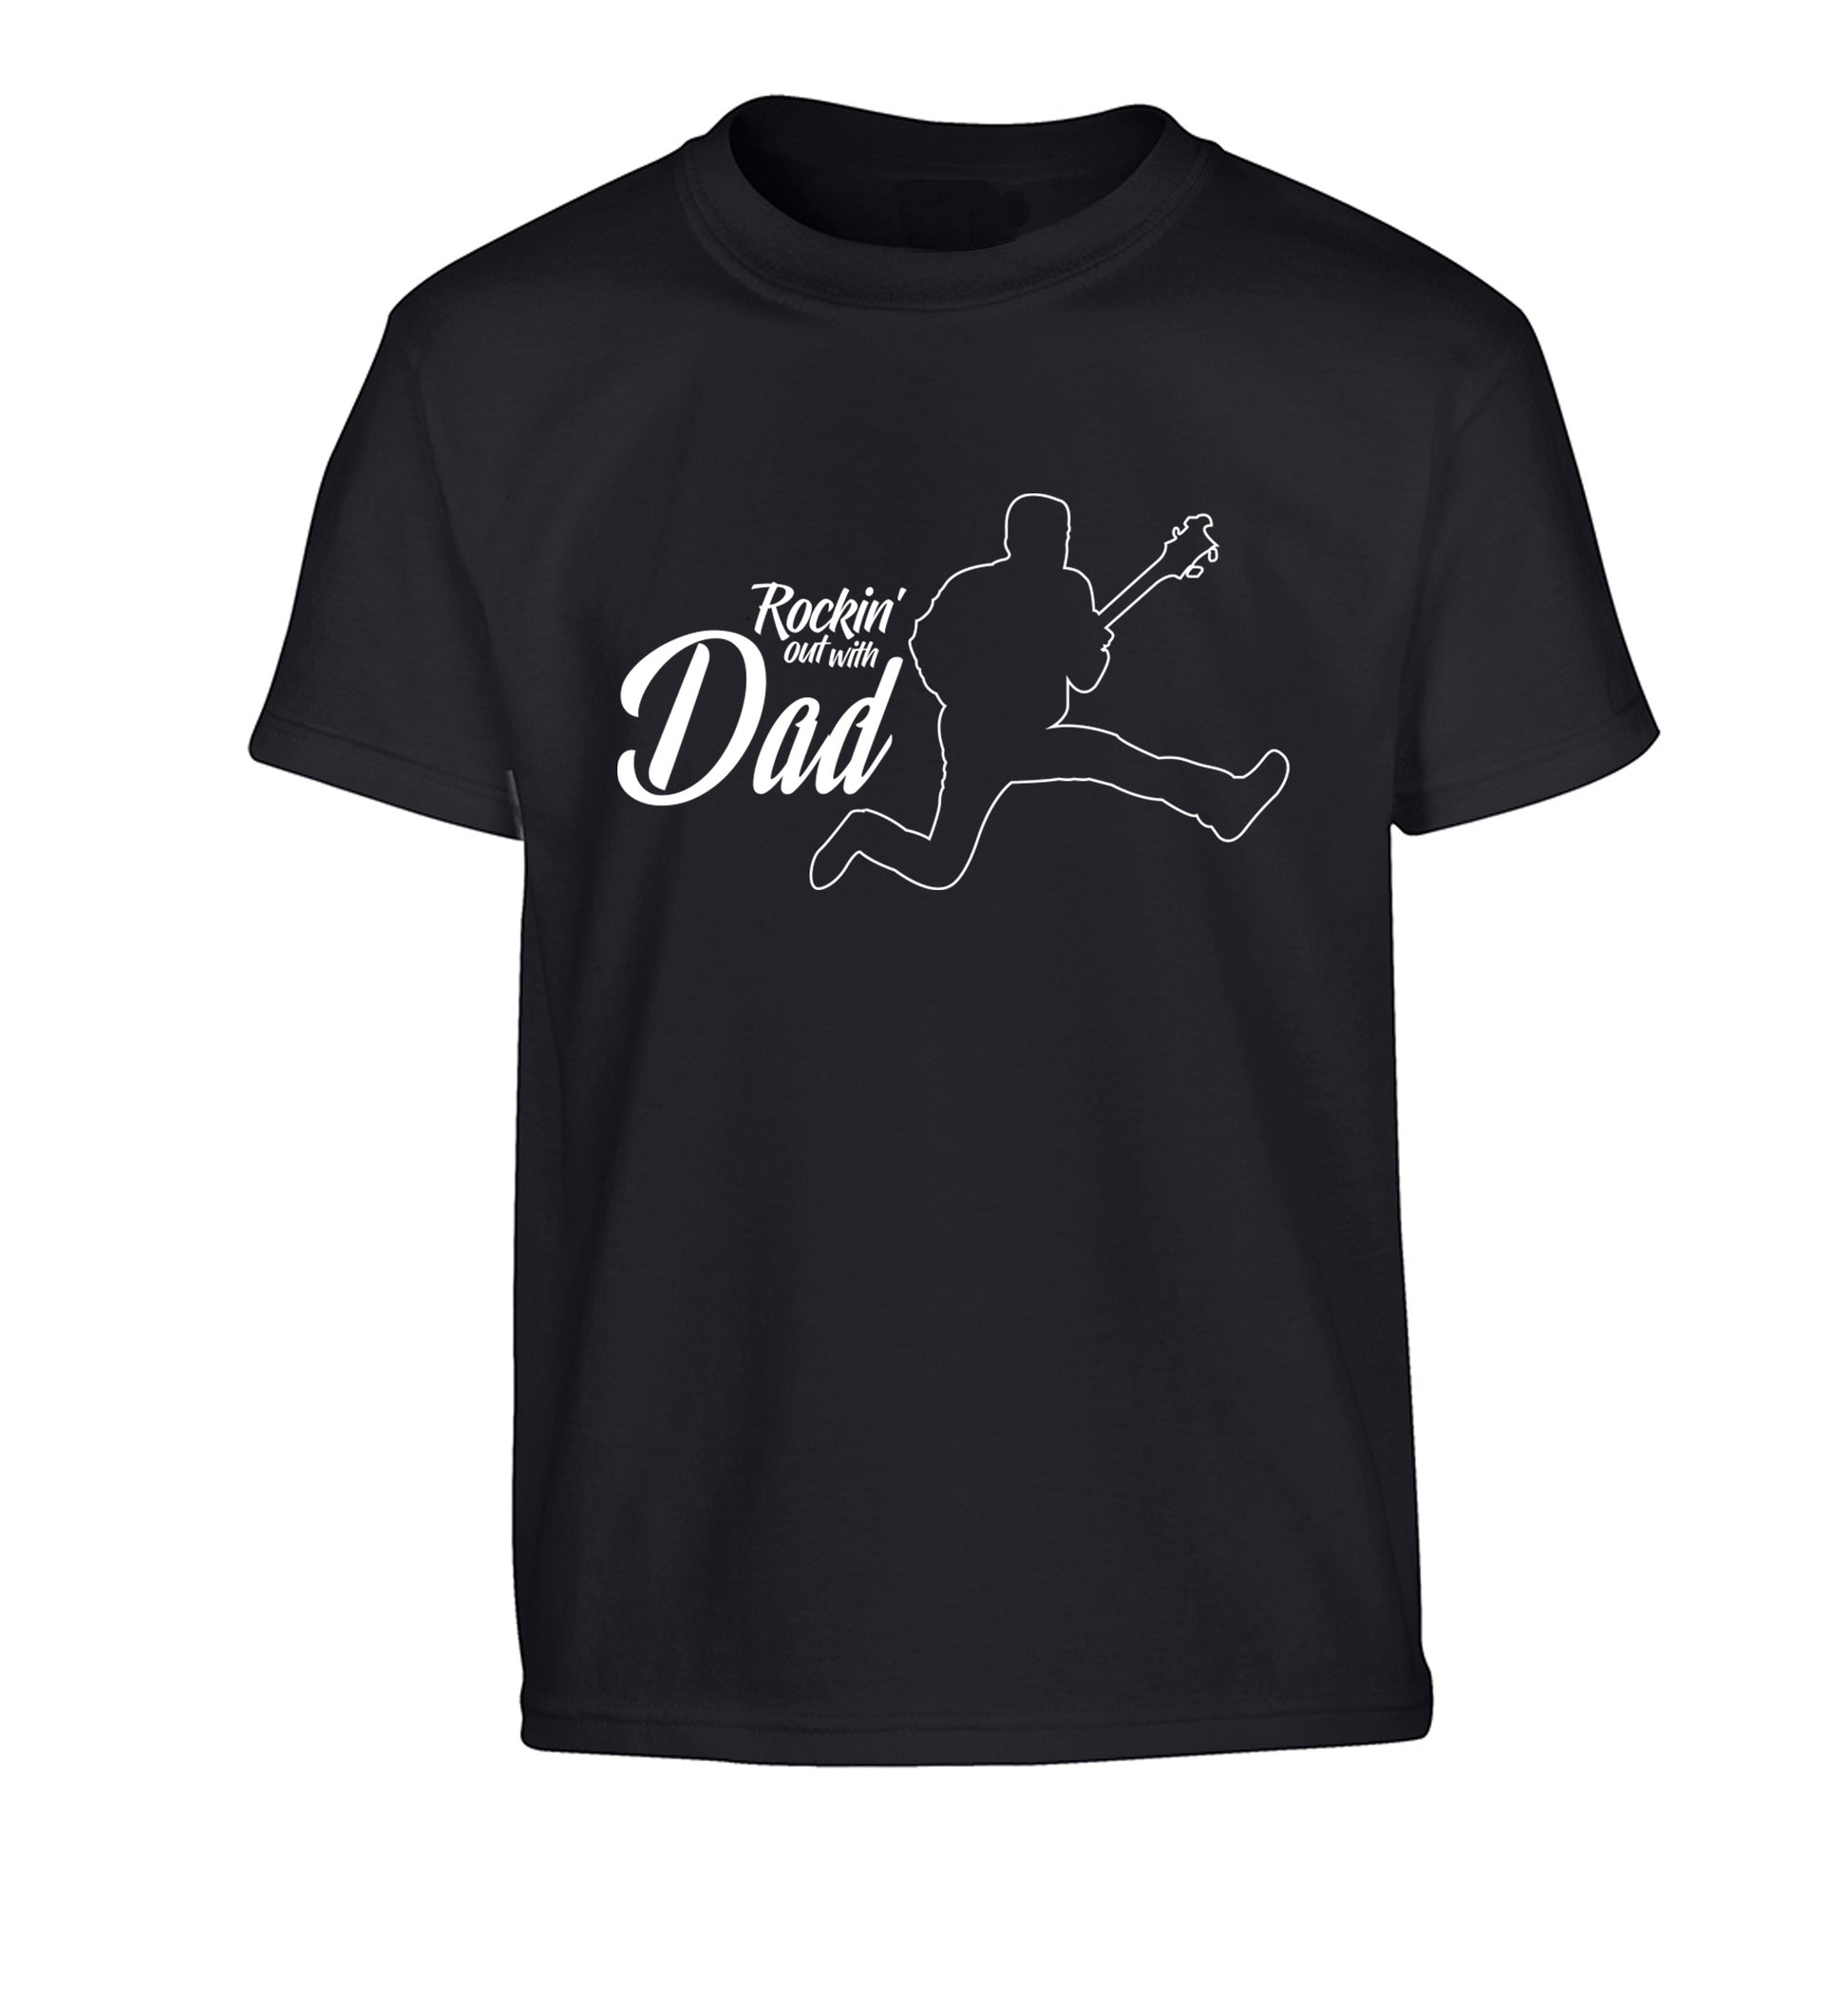 Rockin out with dad Children's black Tshirt 12-13 Years